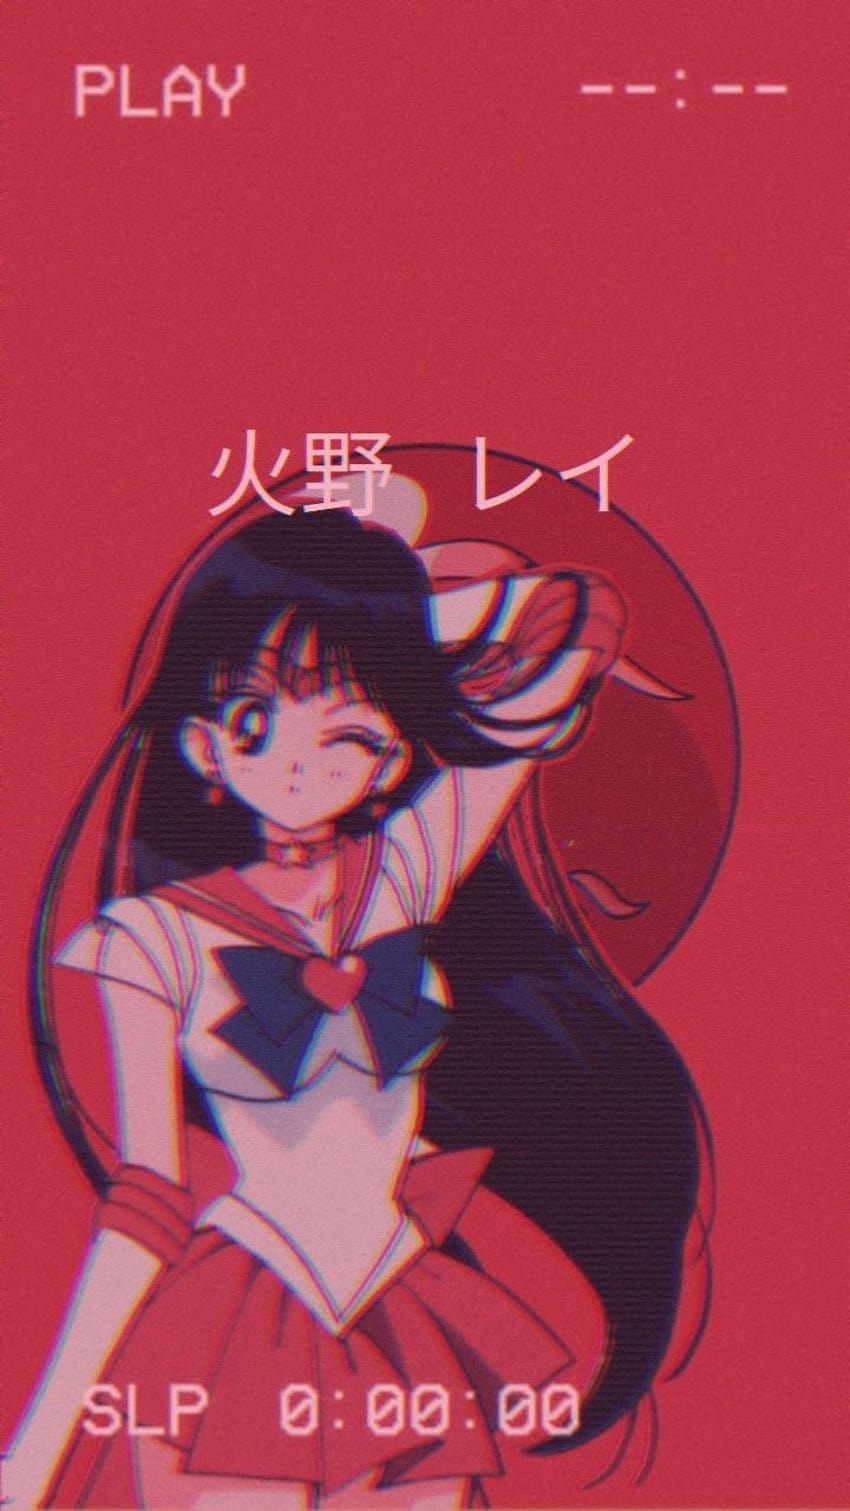 100+] Red Anime Aesthetic Wallpapers | Wallpapers.com